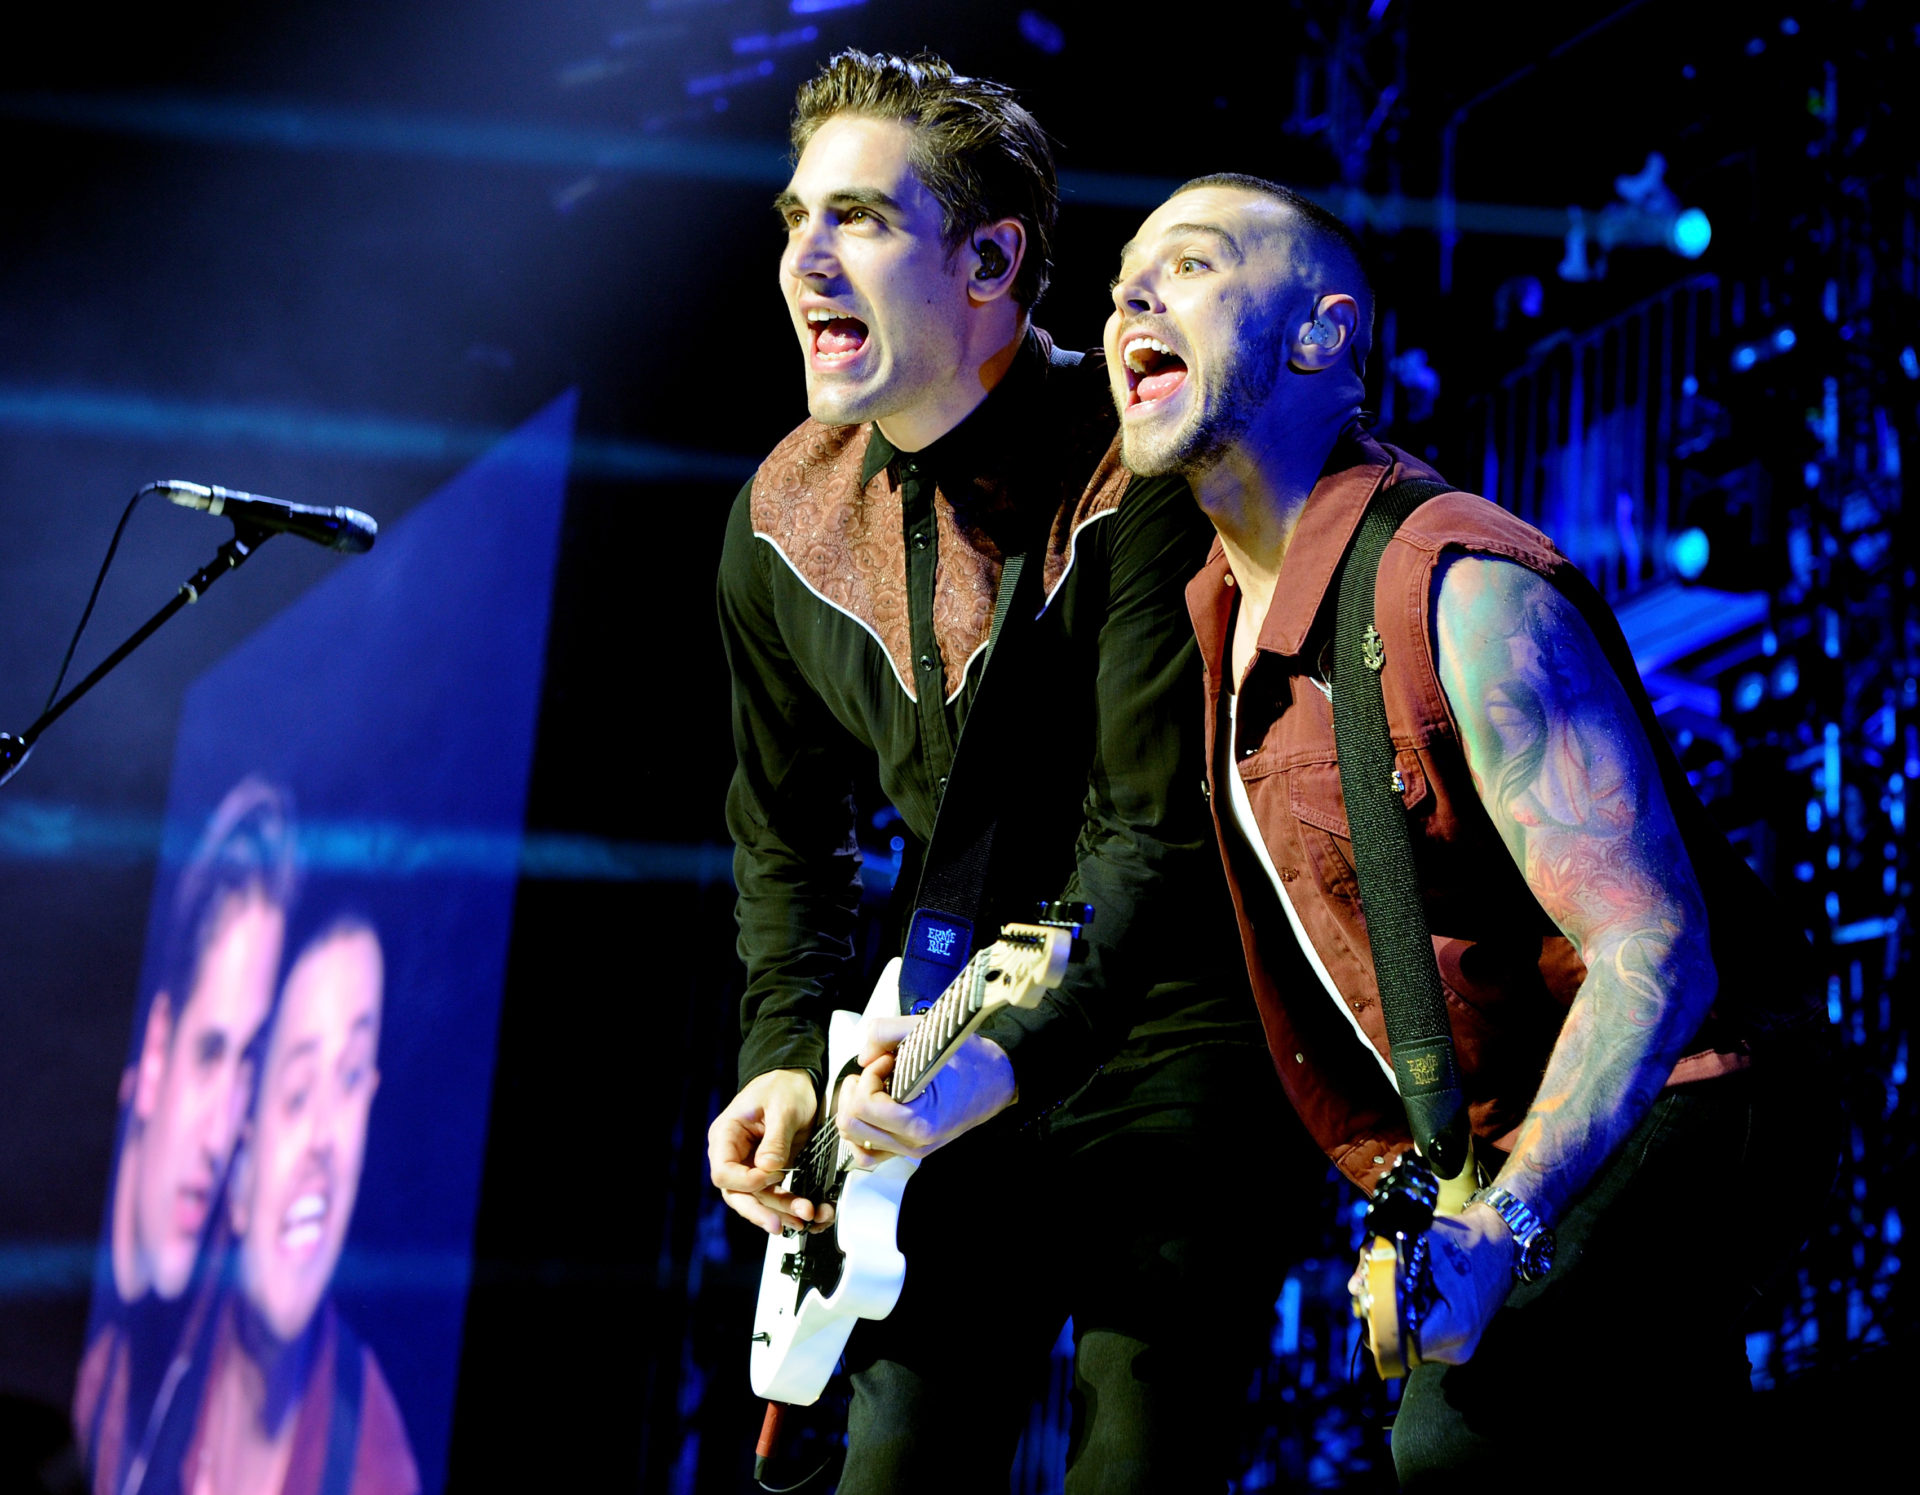 Busted Perform At The Manchester Arena